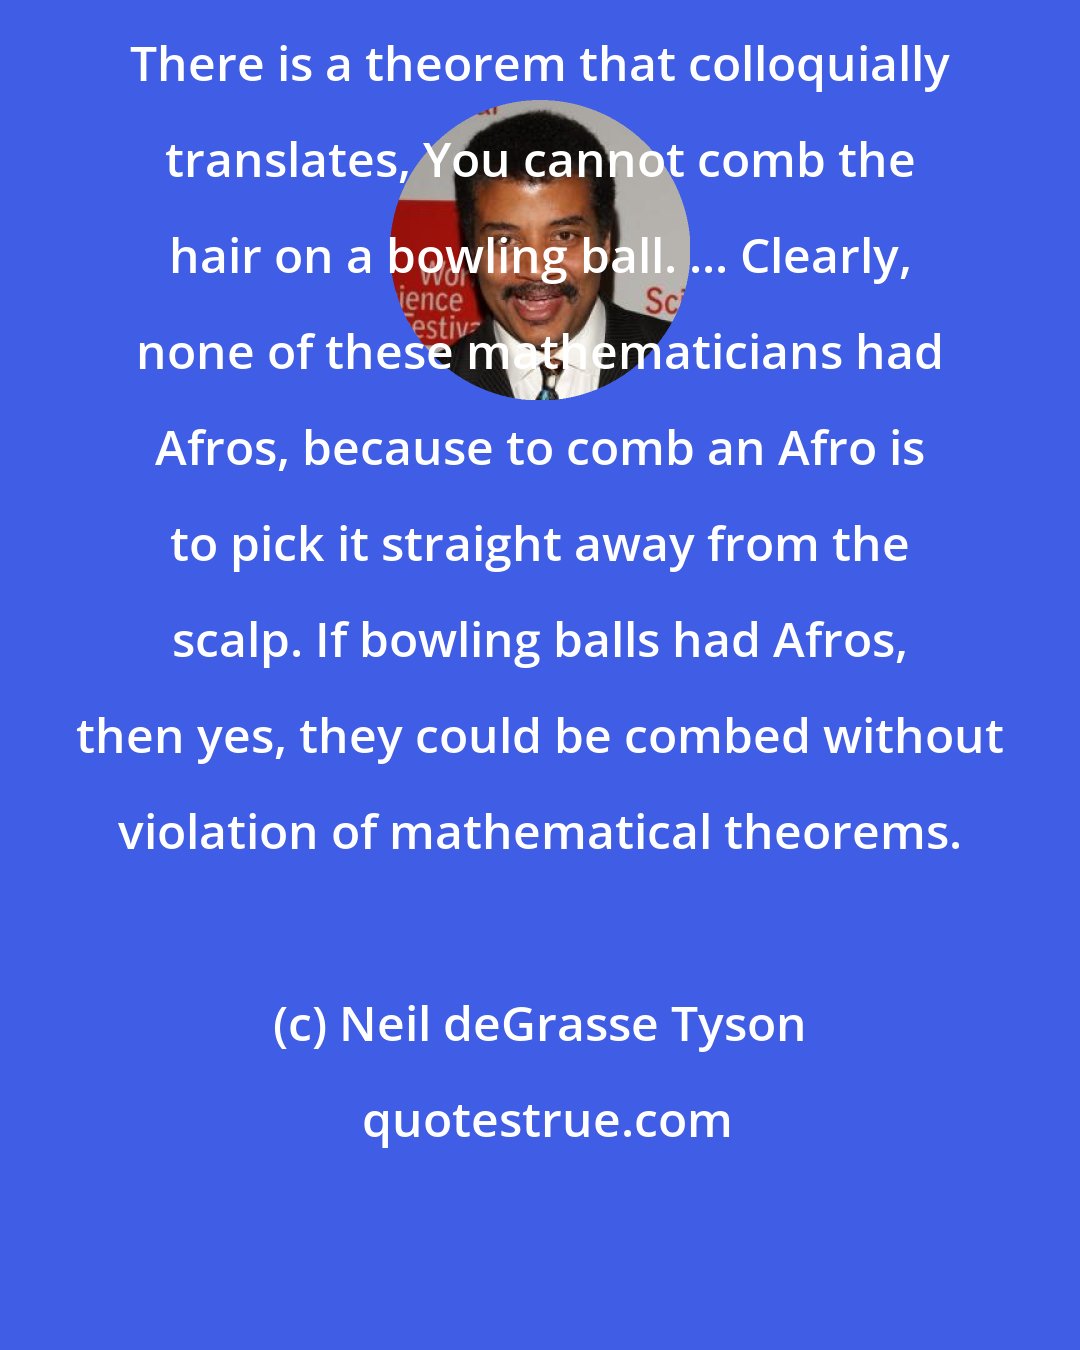 Neil deGrasse Tyson: There is a theorem that colloquially translates, You cannot comb the hair on a bowling ball. ... Clearly, none of these mathematicians had Afros, because to comb an Afro is to pick it straight away from the scalp. If bowling balls had Afros, then yes, they could be combed without violation of mathematical theorems.